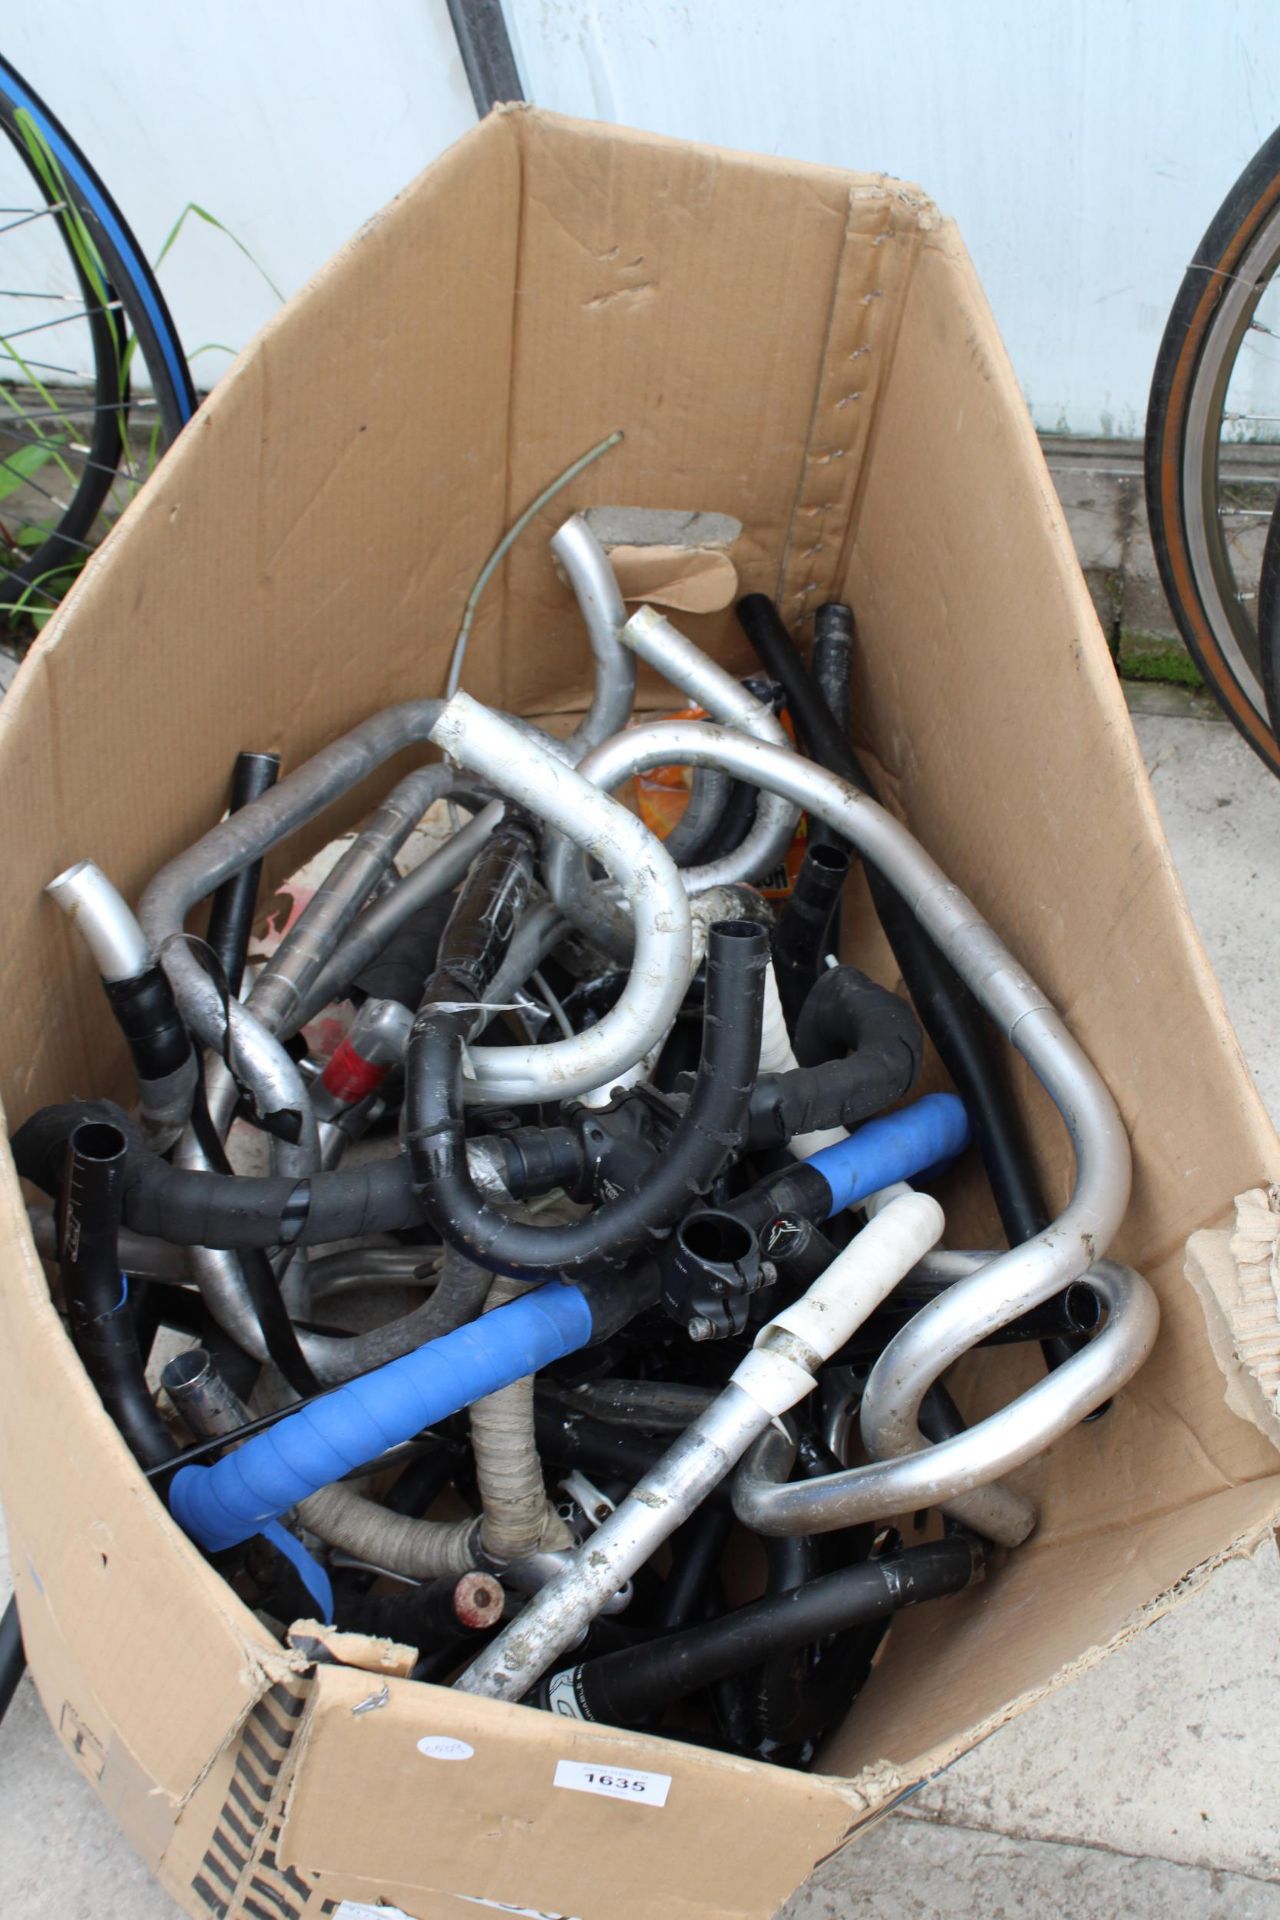 A LARGE COLLECTION OF VARIOUS BIKE HANDLE BARS - Image 2 of 3